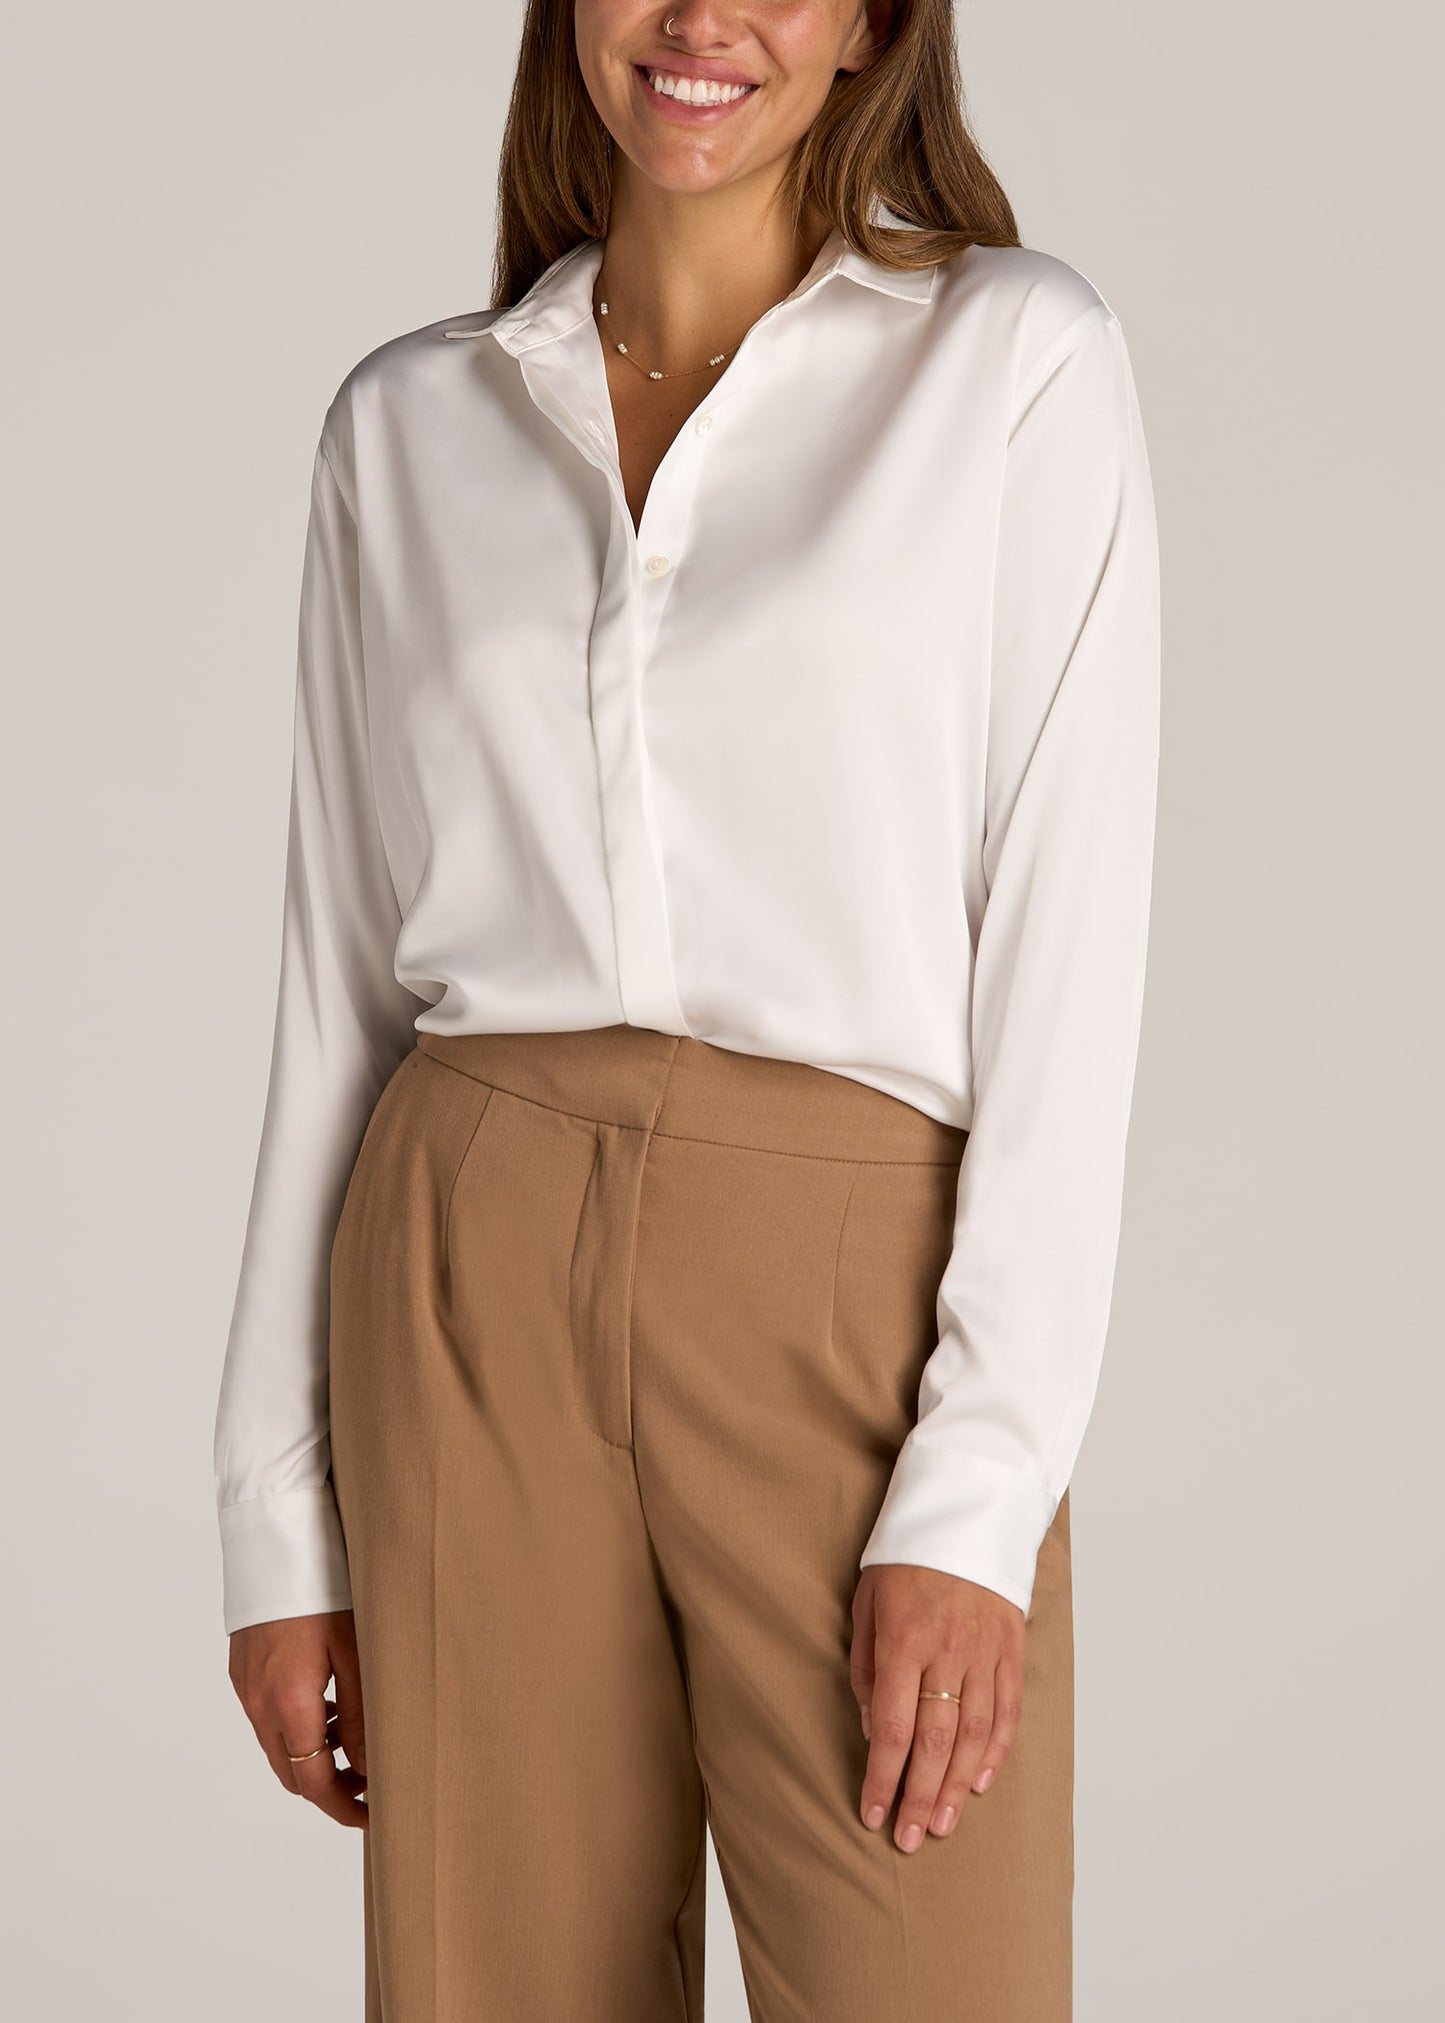 A tall woman wearing American Tall's Relaxed Button Up Tall Women's Blouse in the color Pearl White.